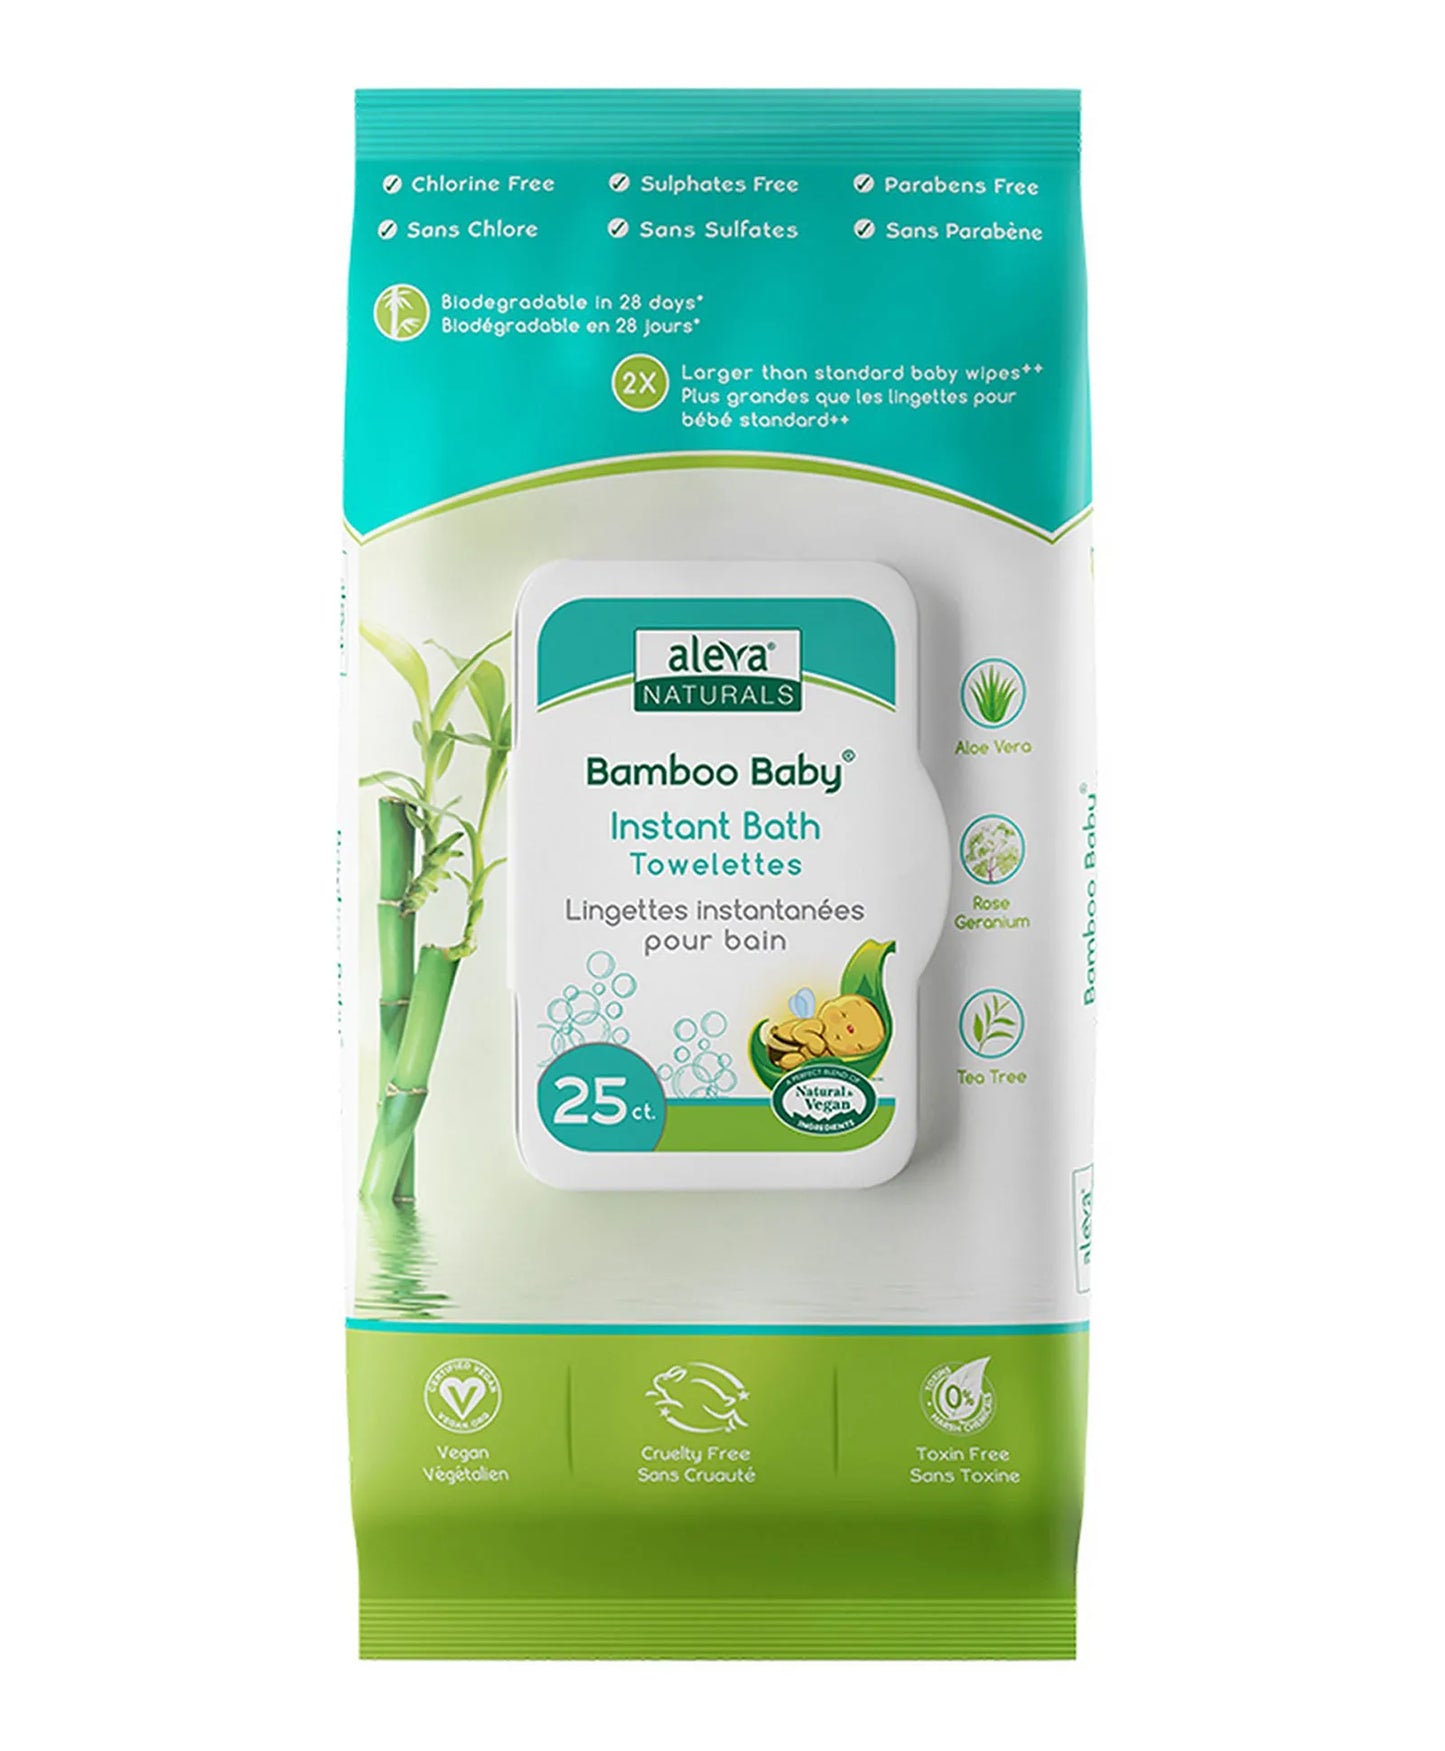 Aleva Naturals Bamboo Baby Instant Bath Towelettes - 25ct